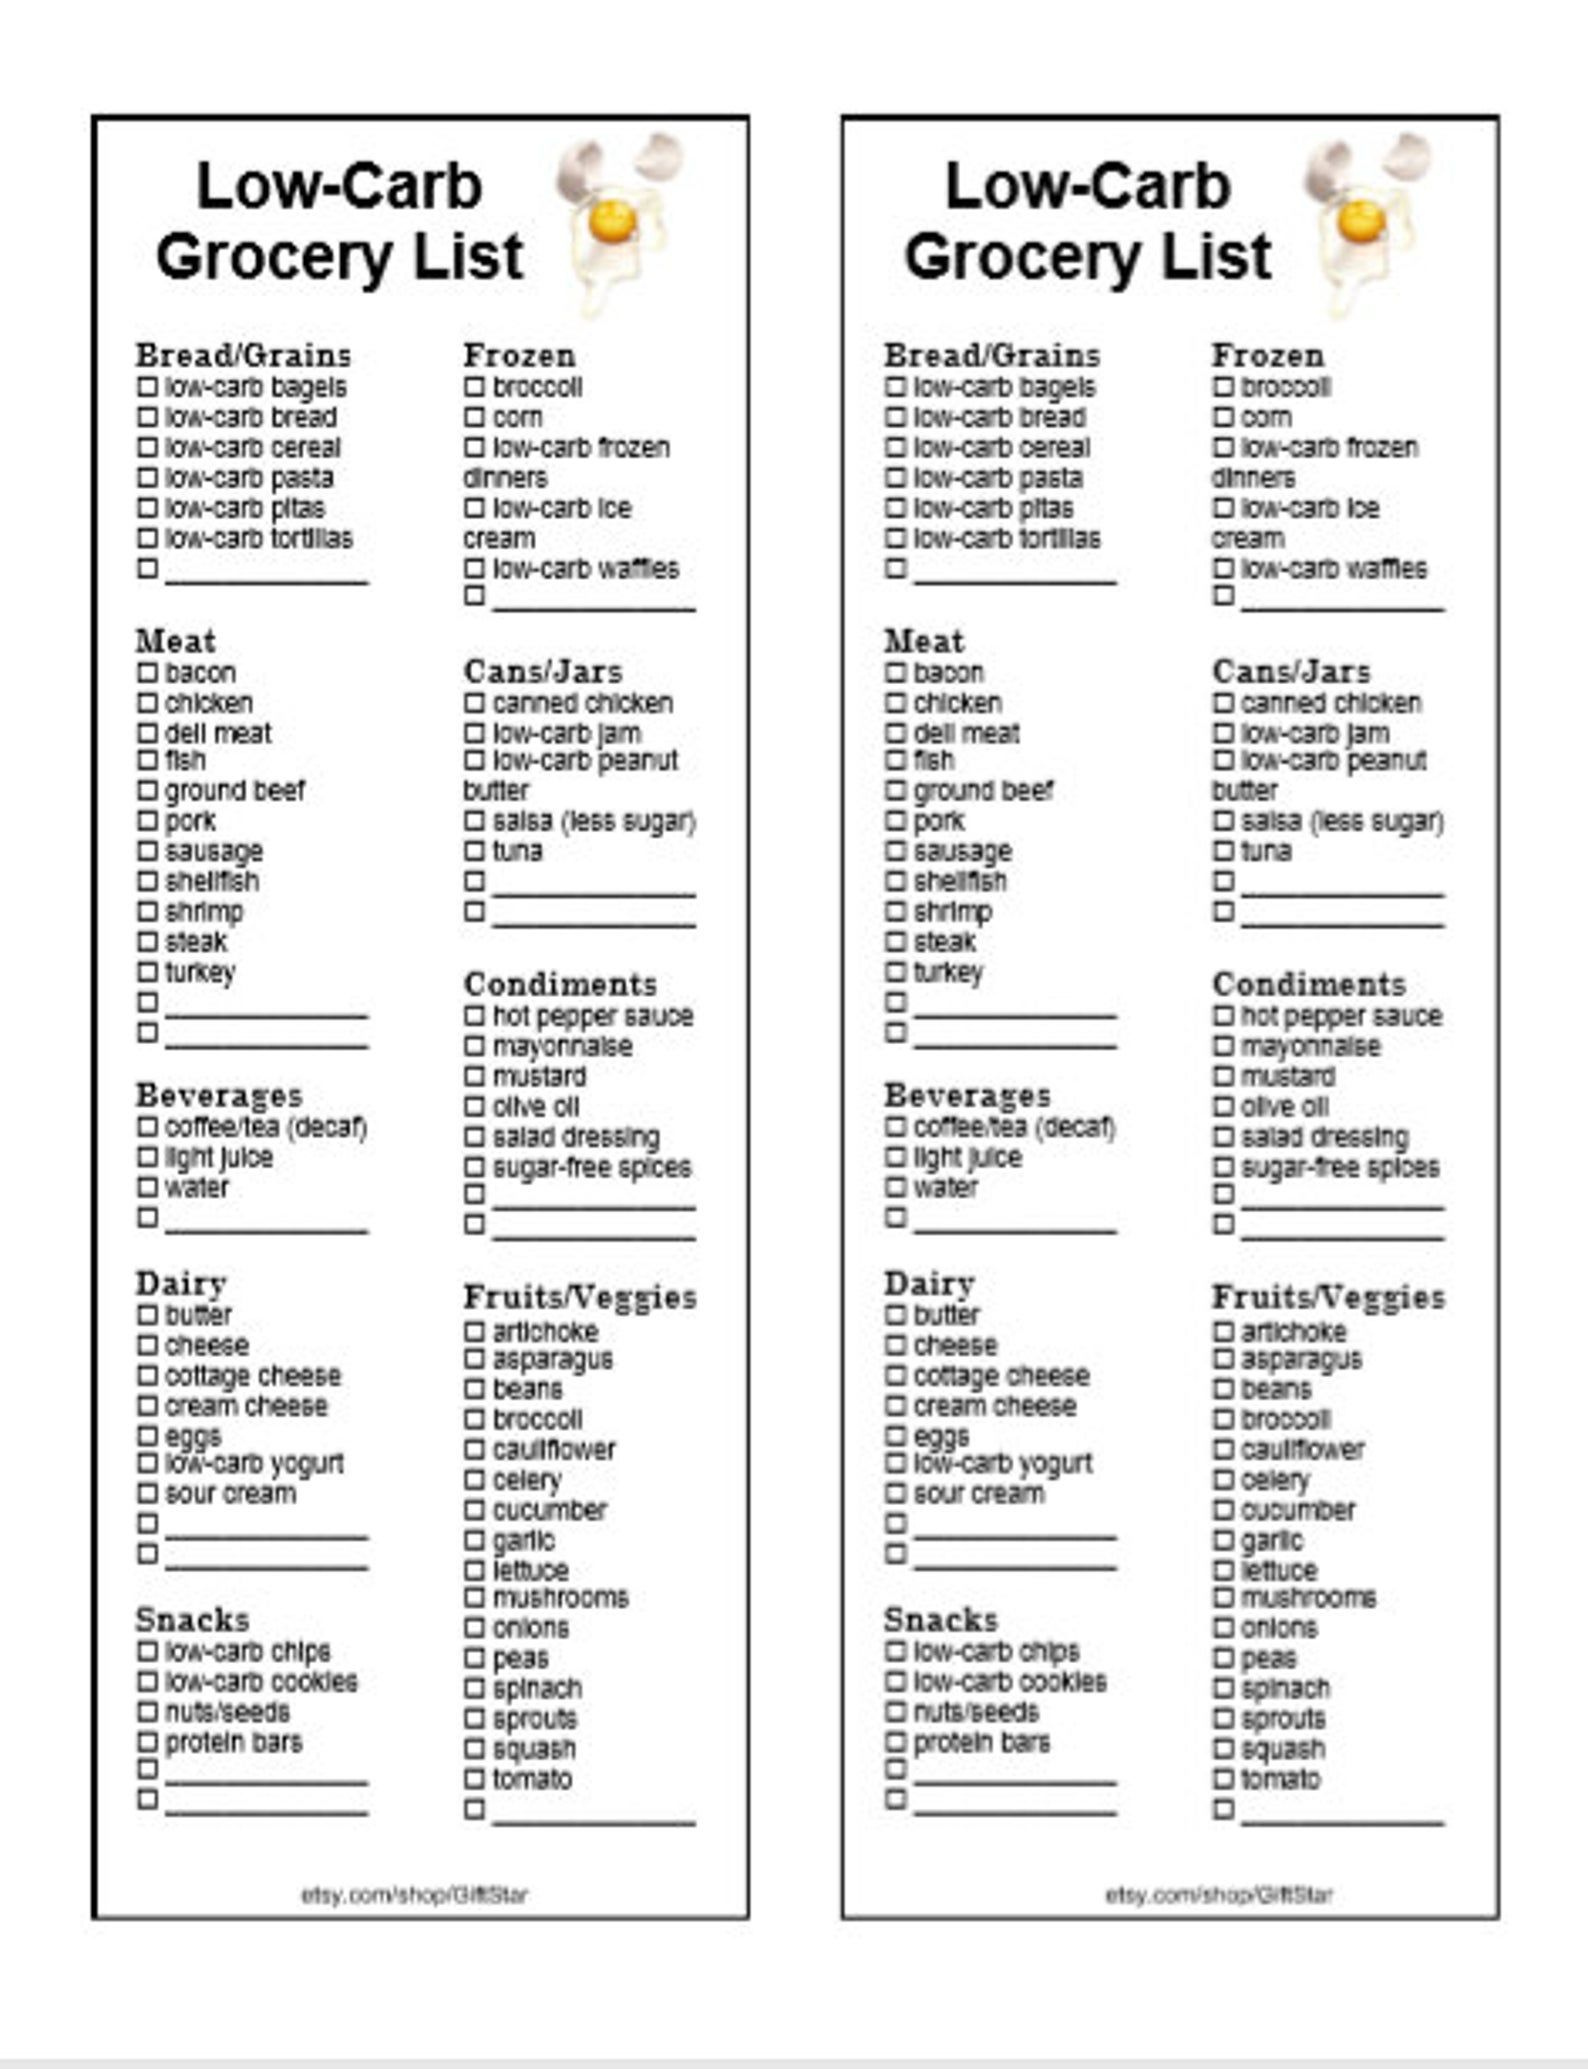  lowcarbbasics Low Carb Grocery Low Carb Grocery List Carbohydrate Diet